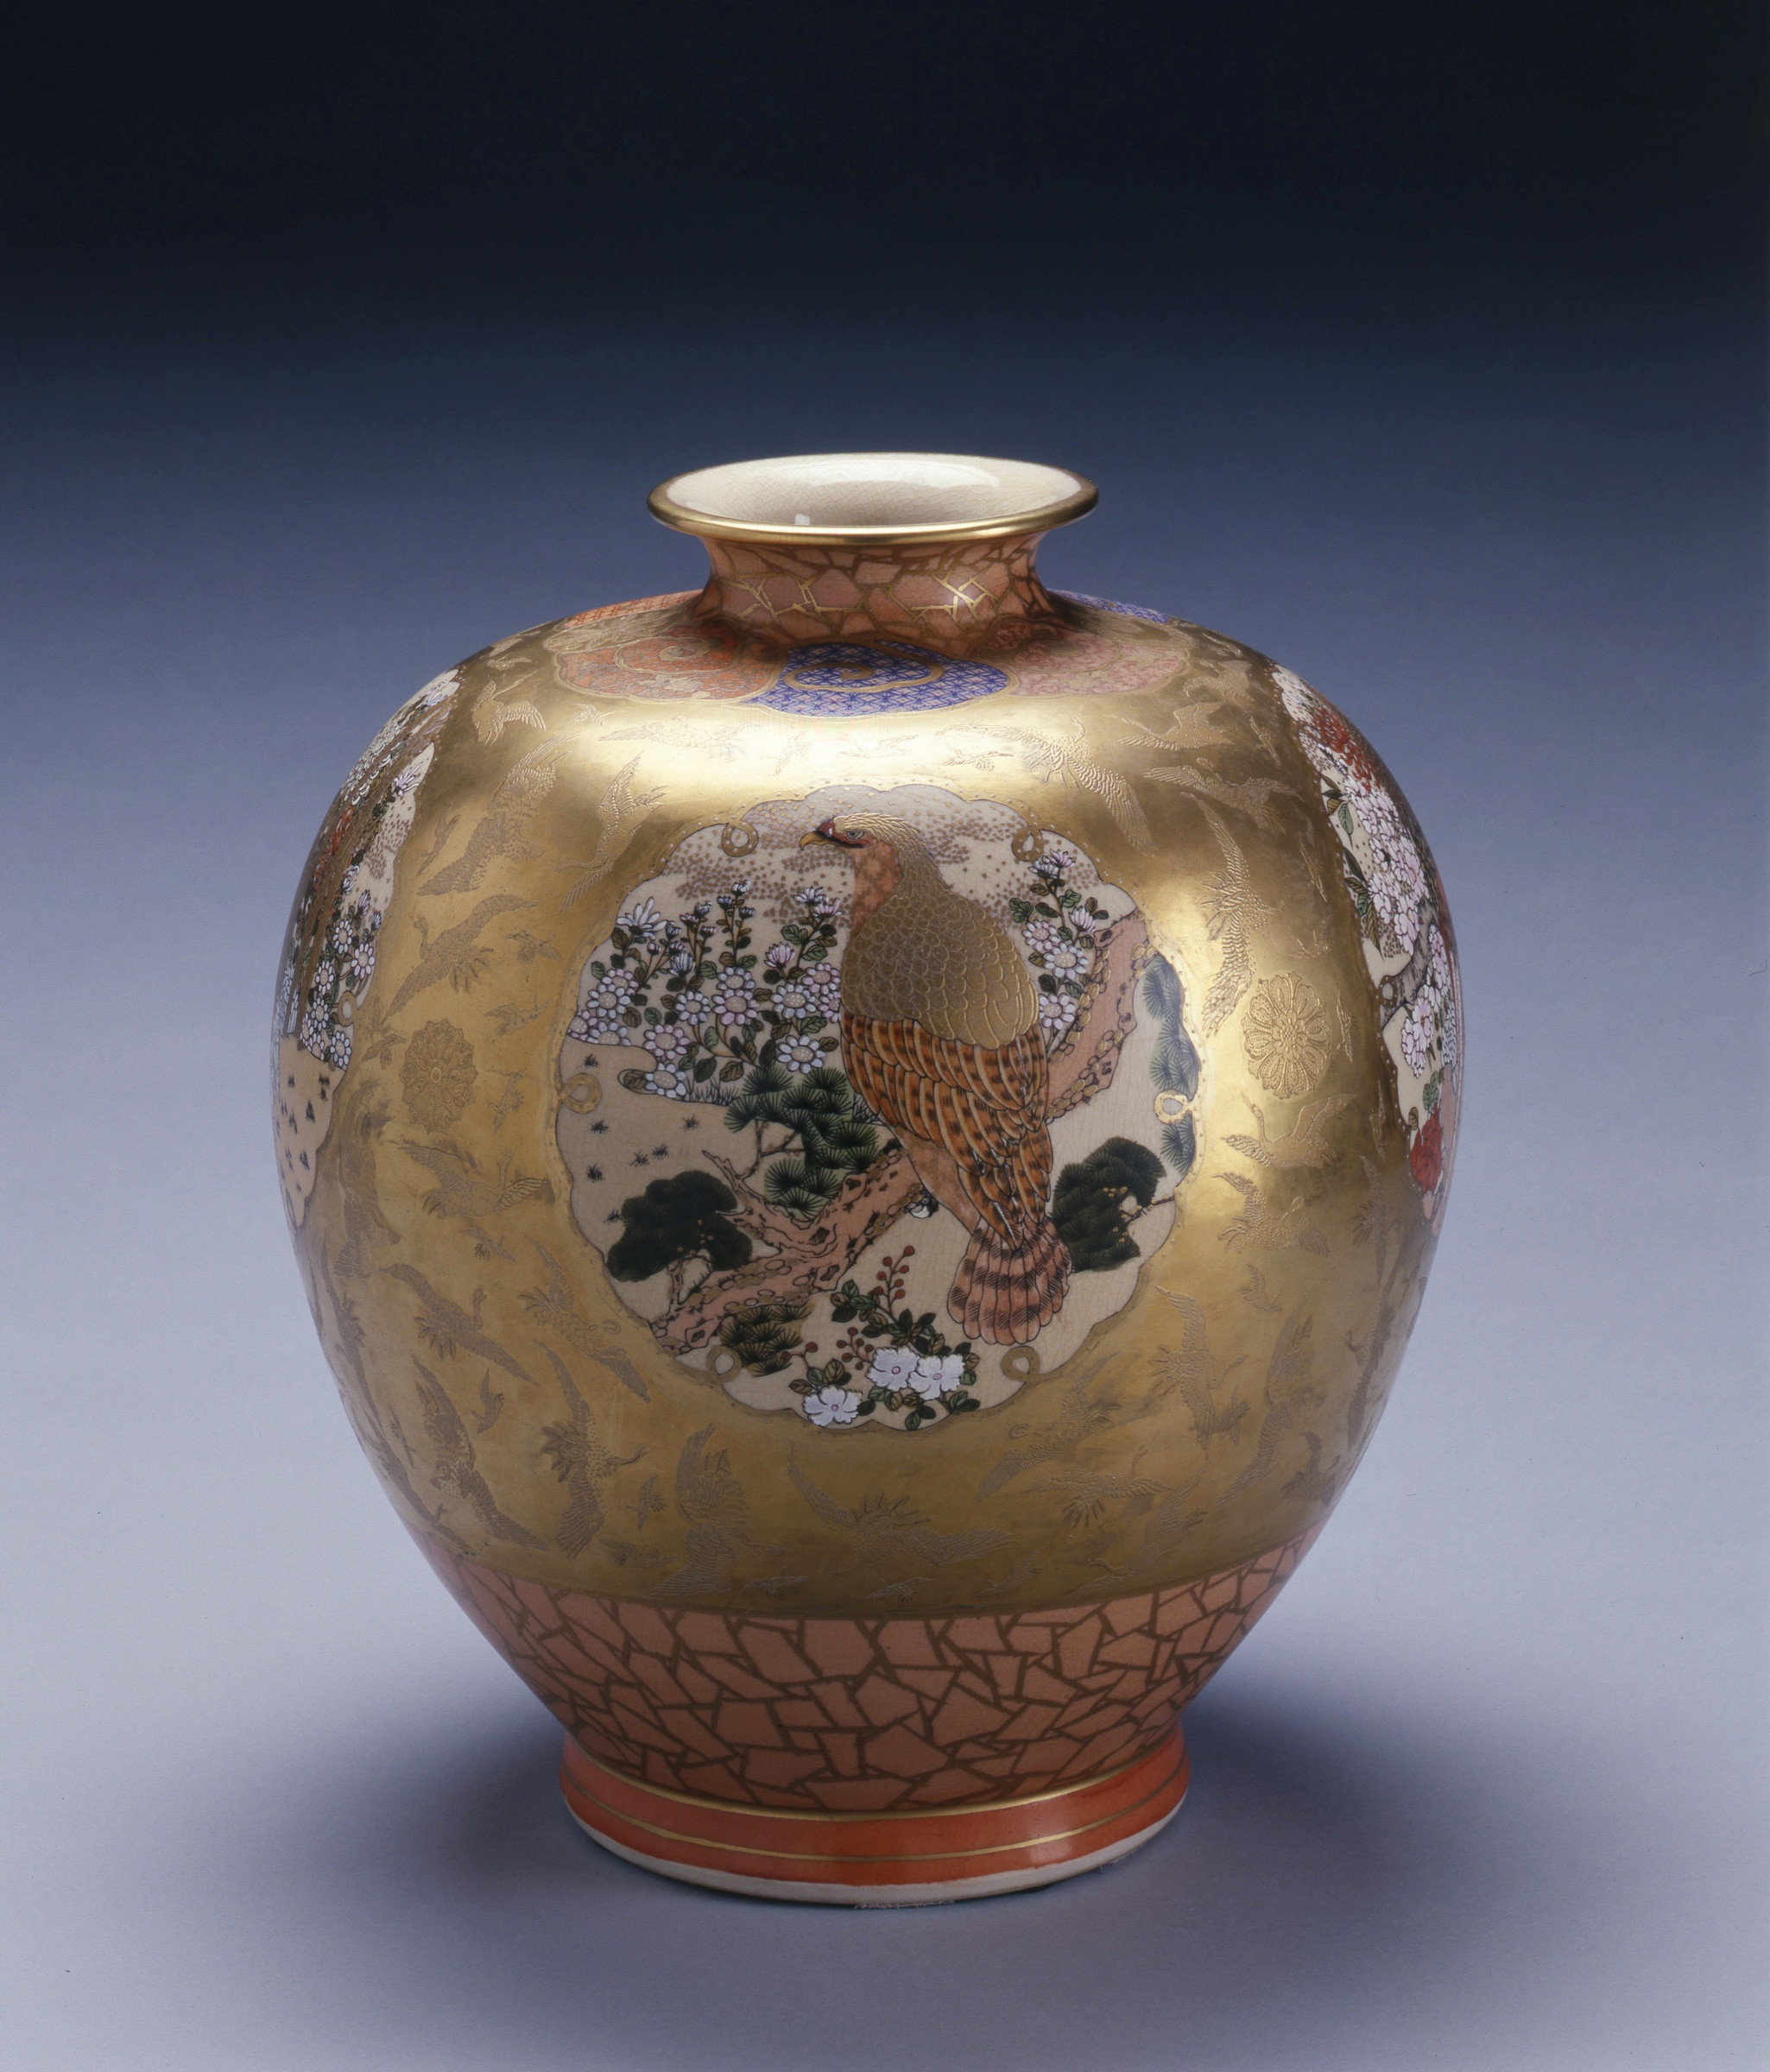 16 Recommended Satsuma China Vase 2024 free download satsuma china vase of satsuma a set of three satsuma pieces japan date circa 1880 1910 within a set of three satsuma pieces